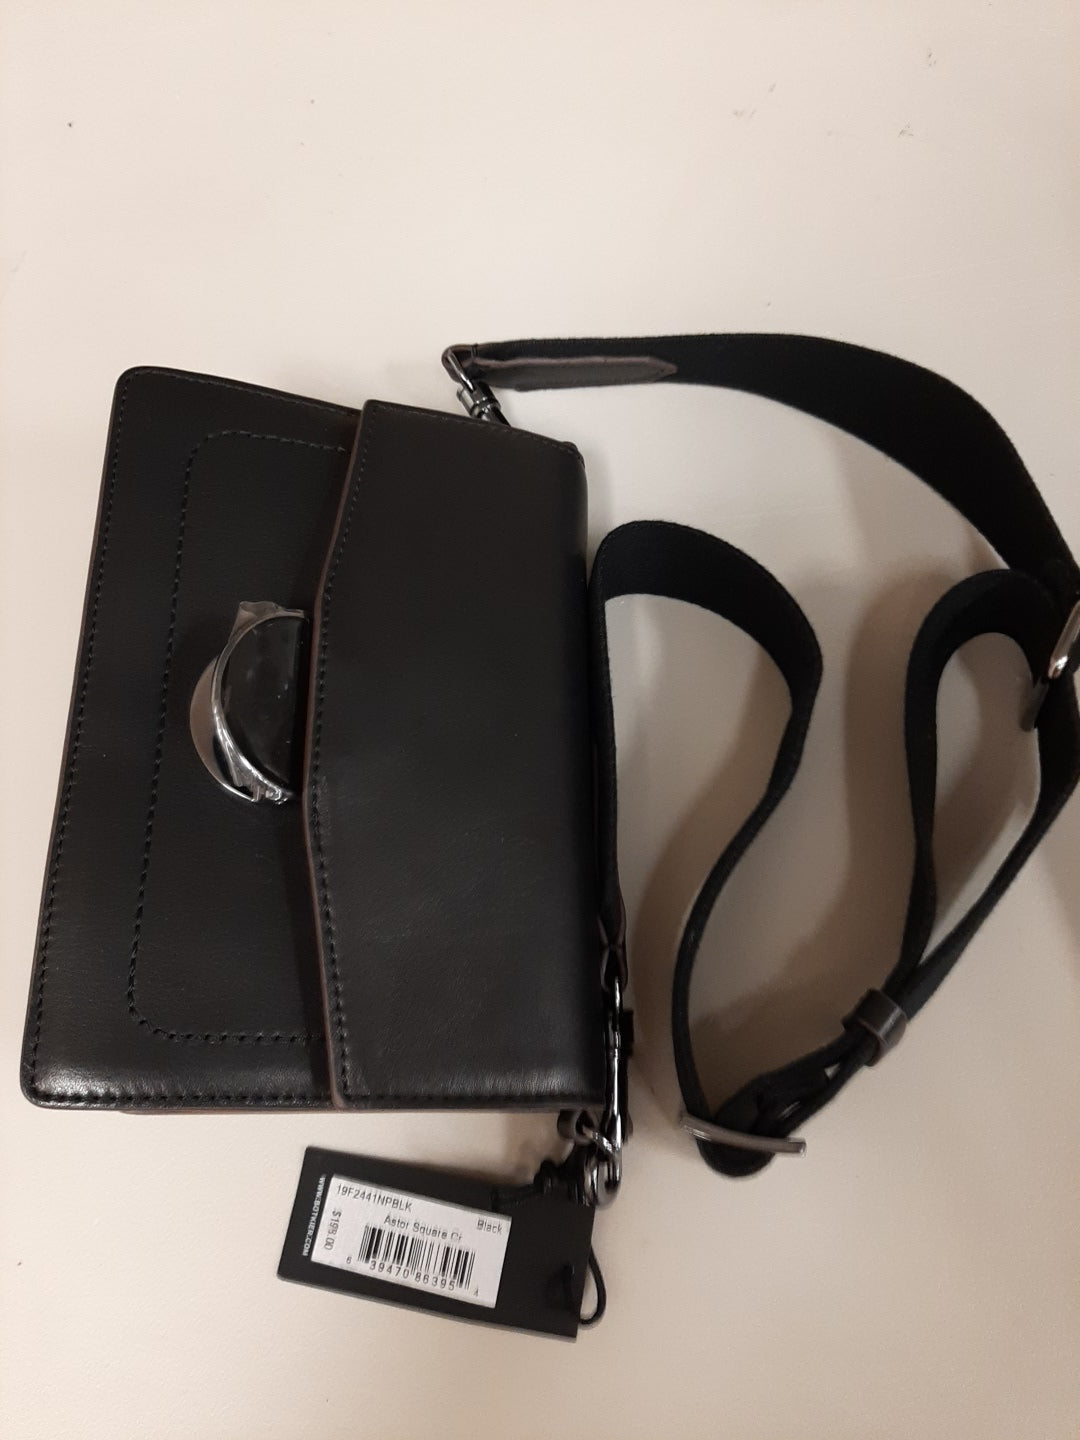 Botkier Astor Square Woman's Leather Cross Body Black Color